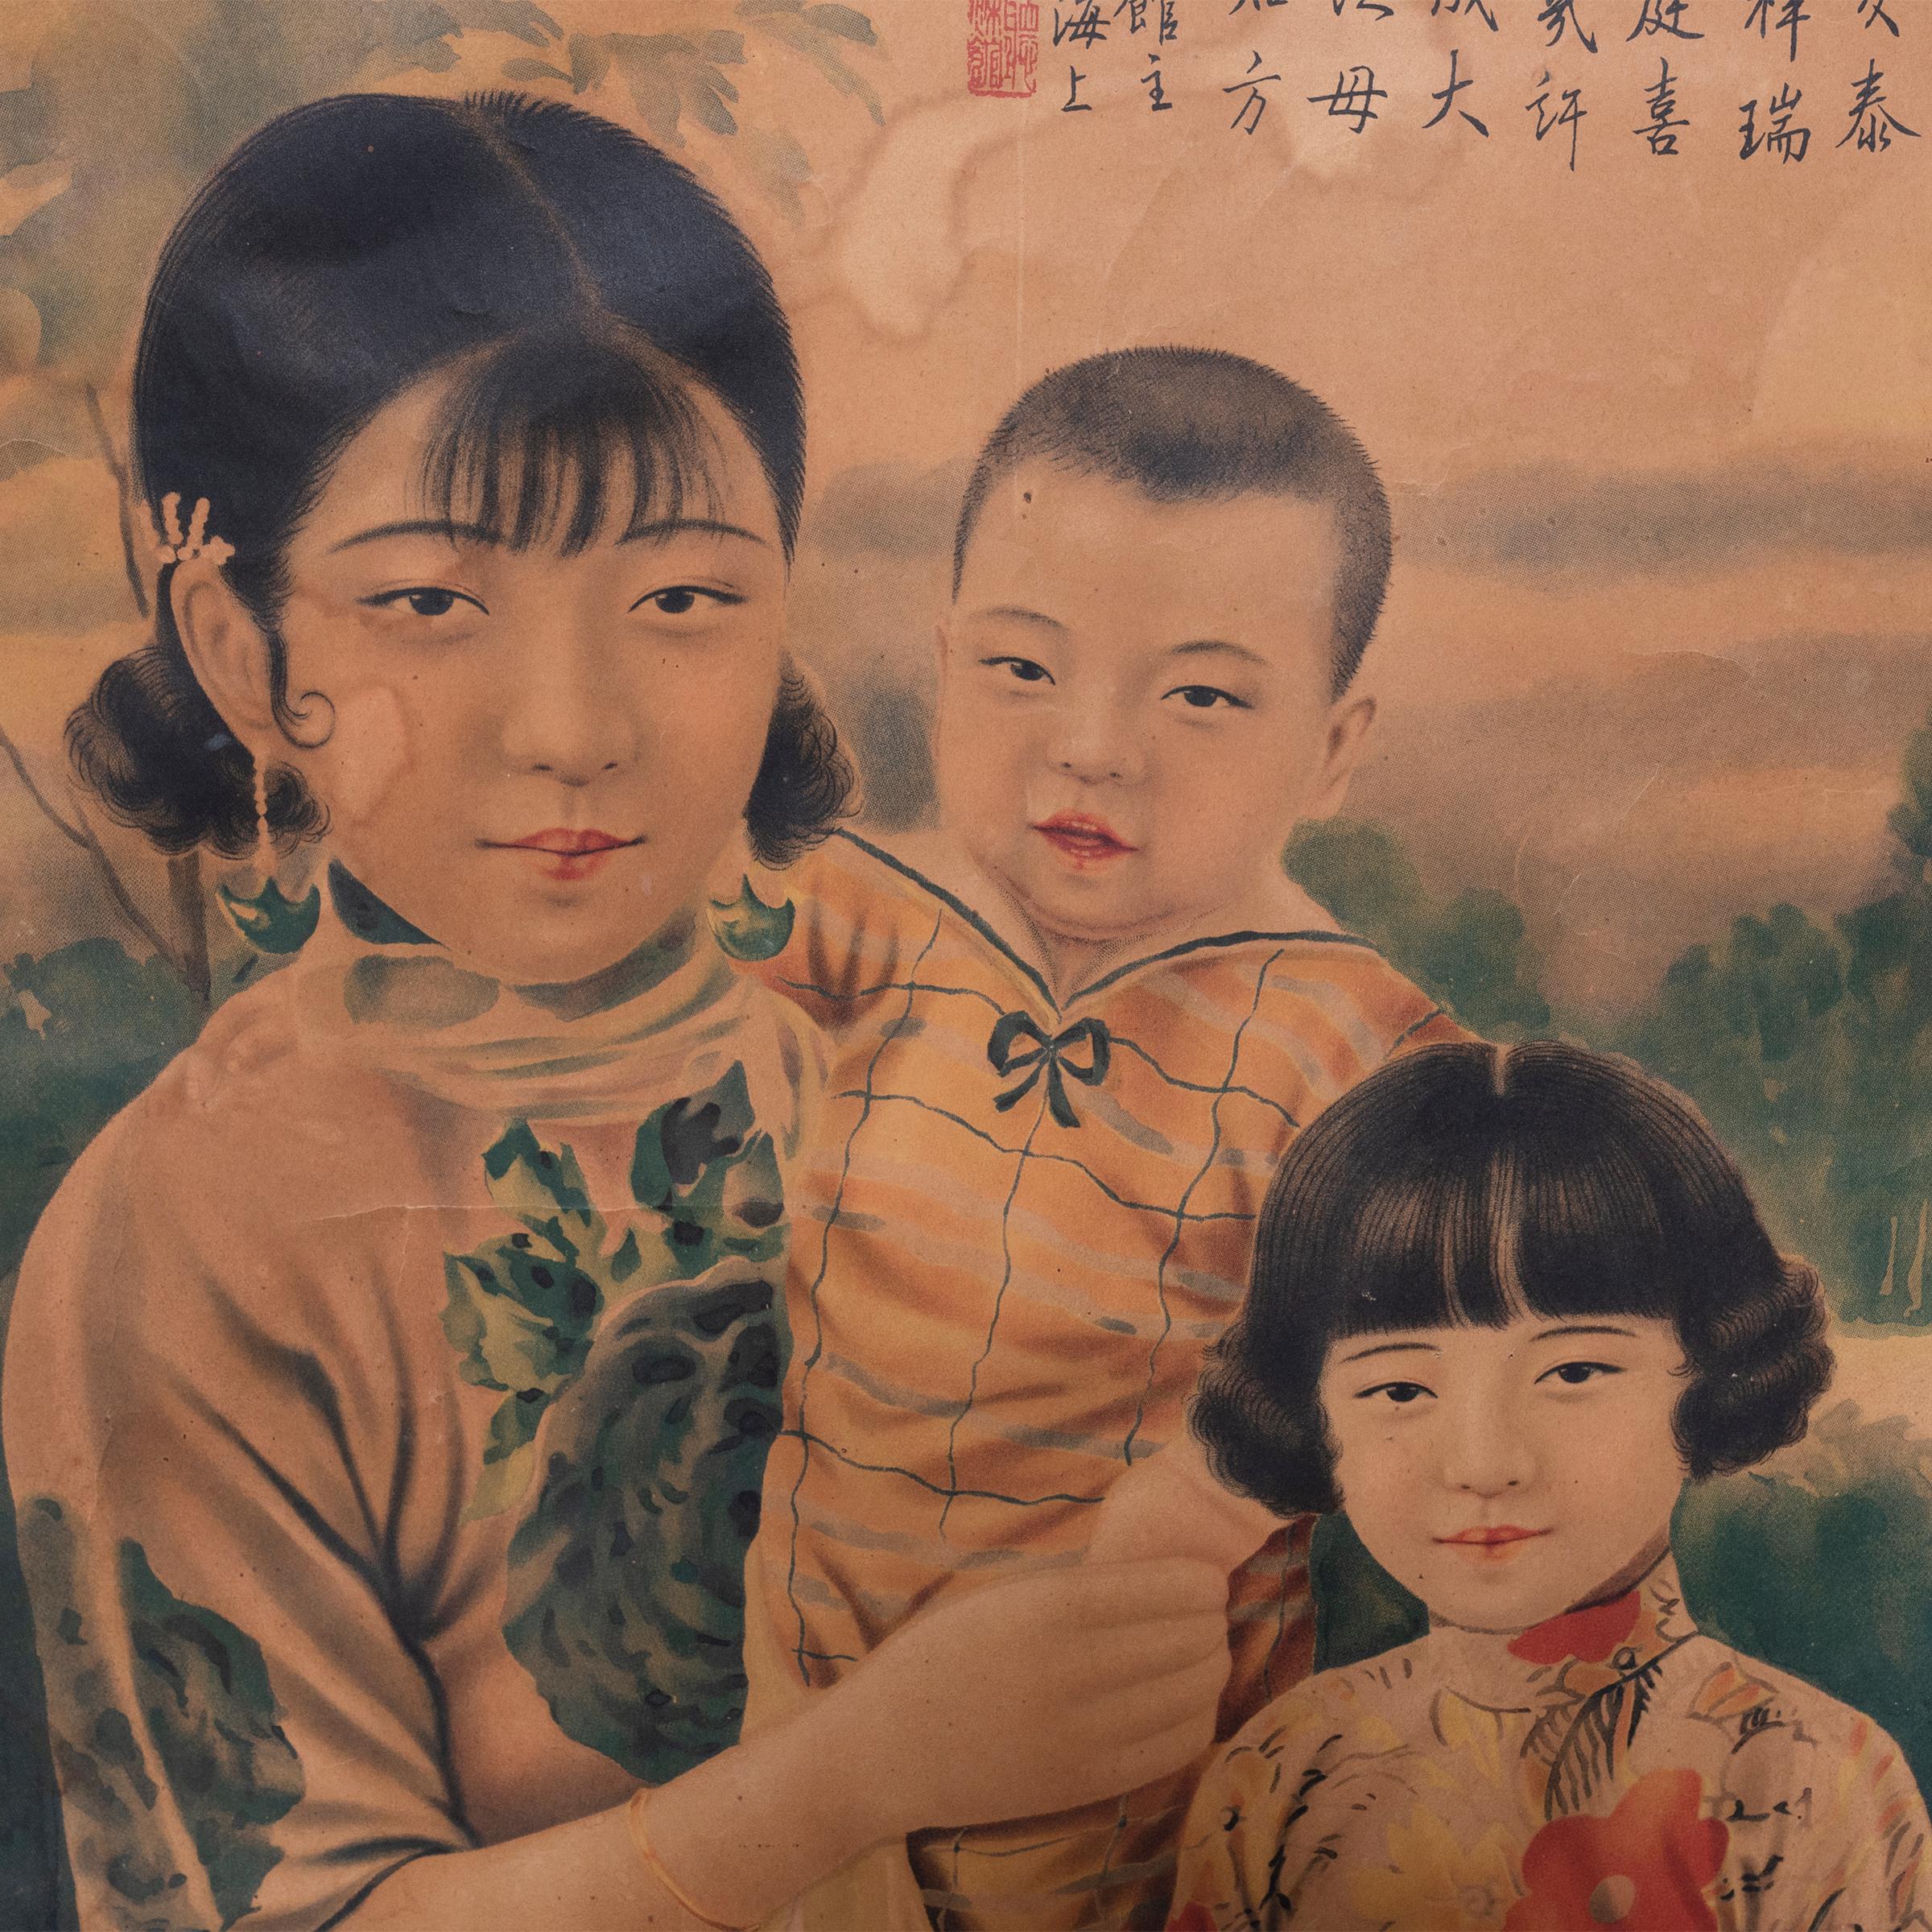 This vintage poster from the 1930s features a fashionably dressed young mother posing with her son and daughter. The poster may have been given as a gift for the Chinese New Year, as the Mandarin characters for 